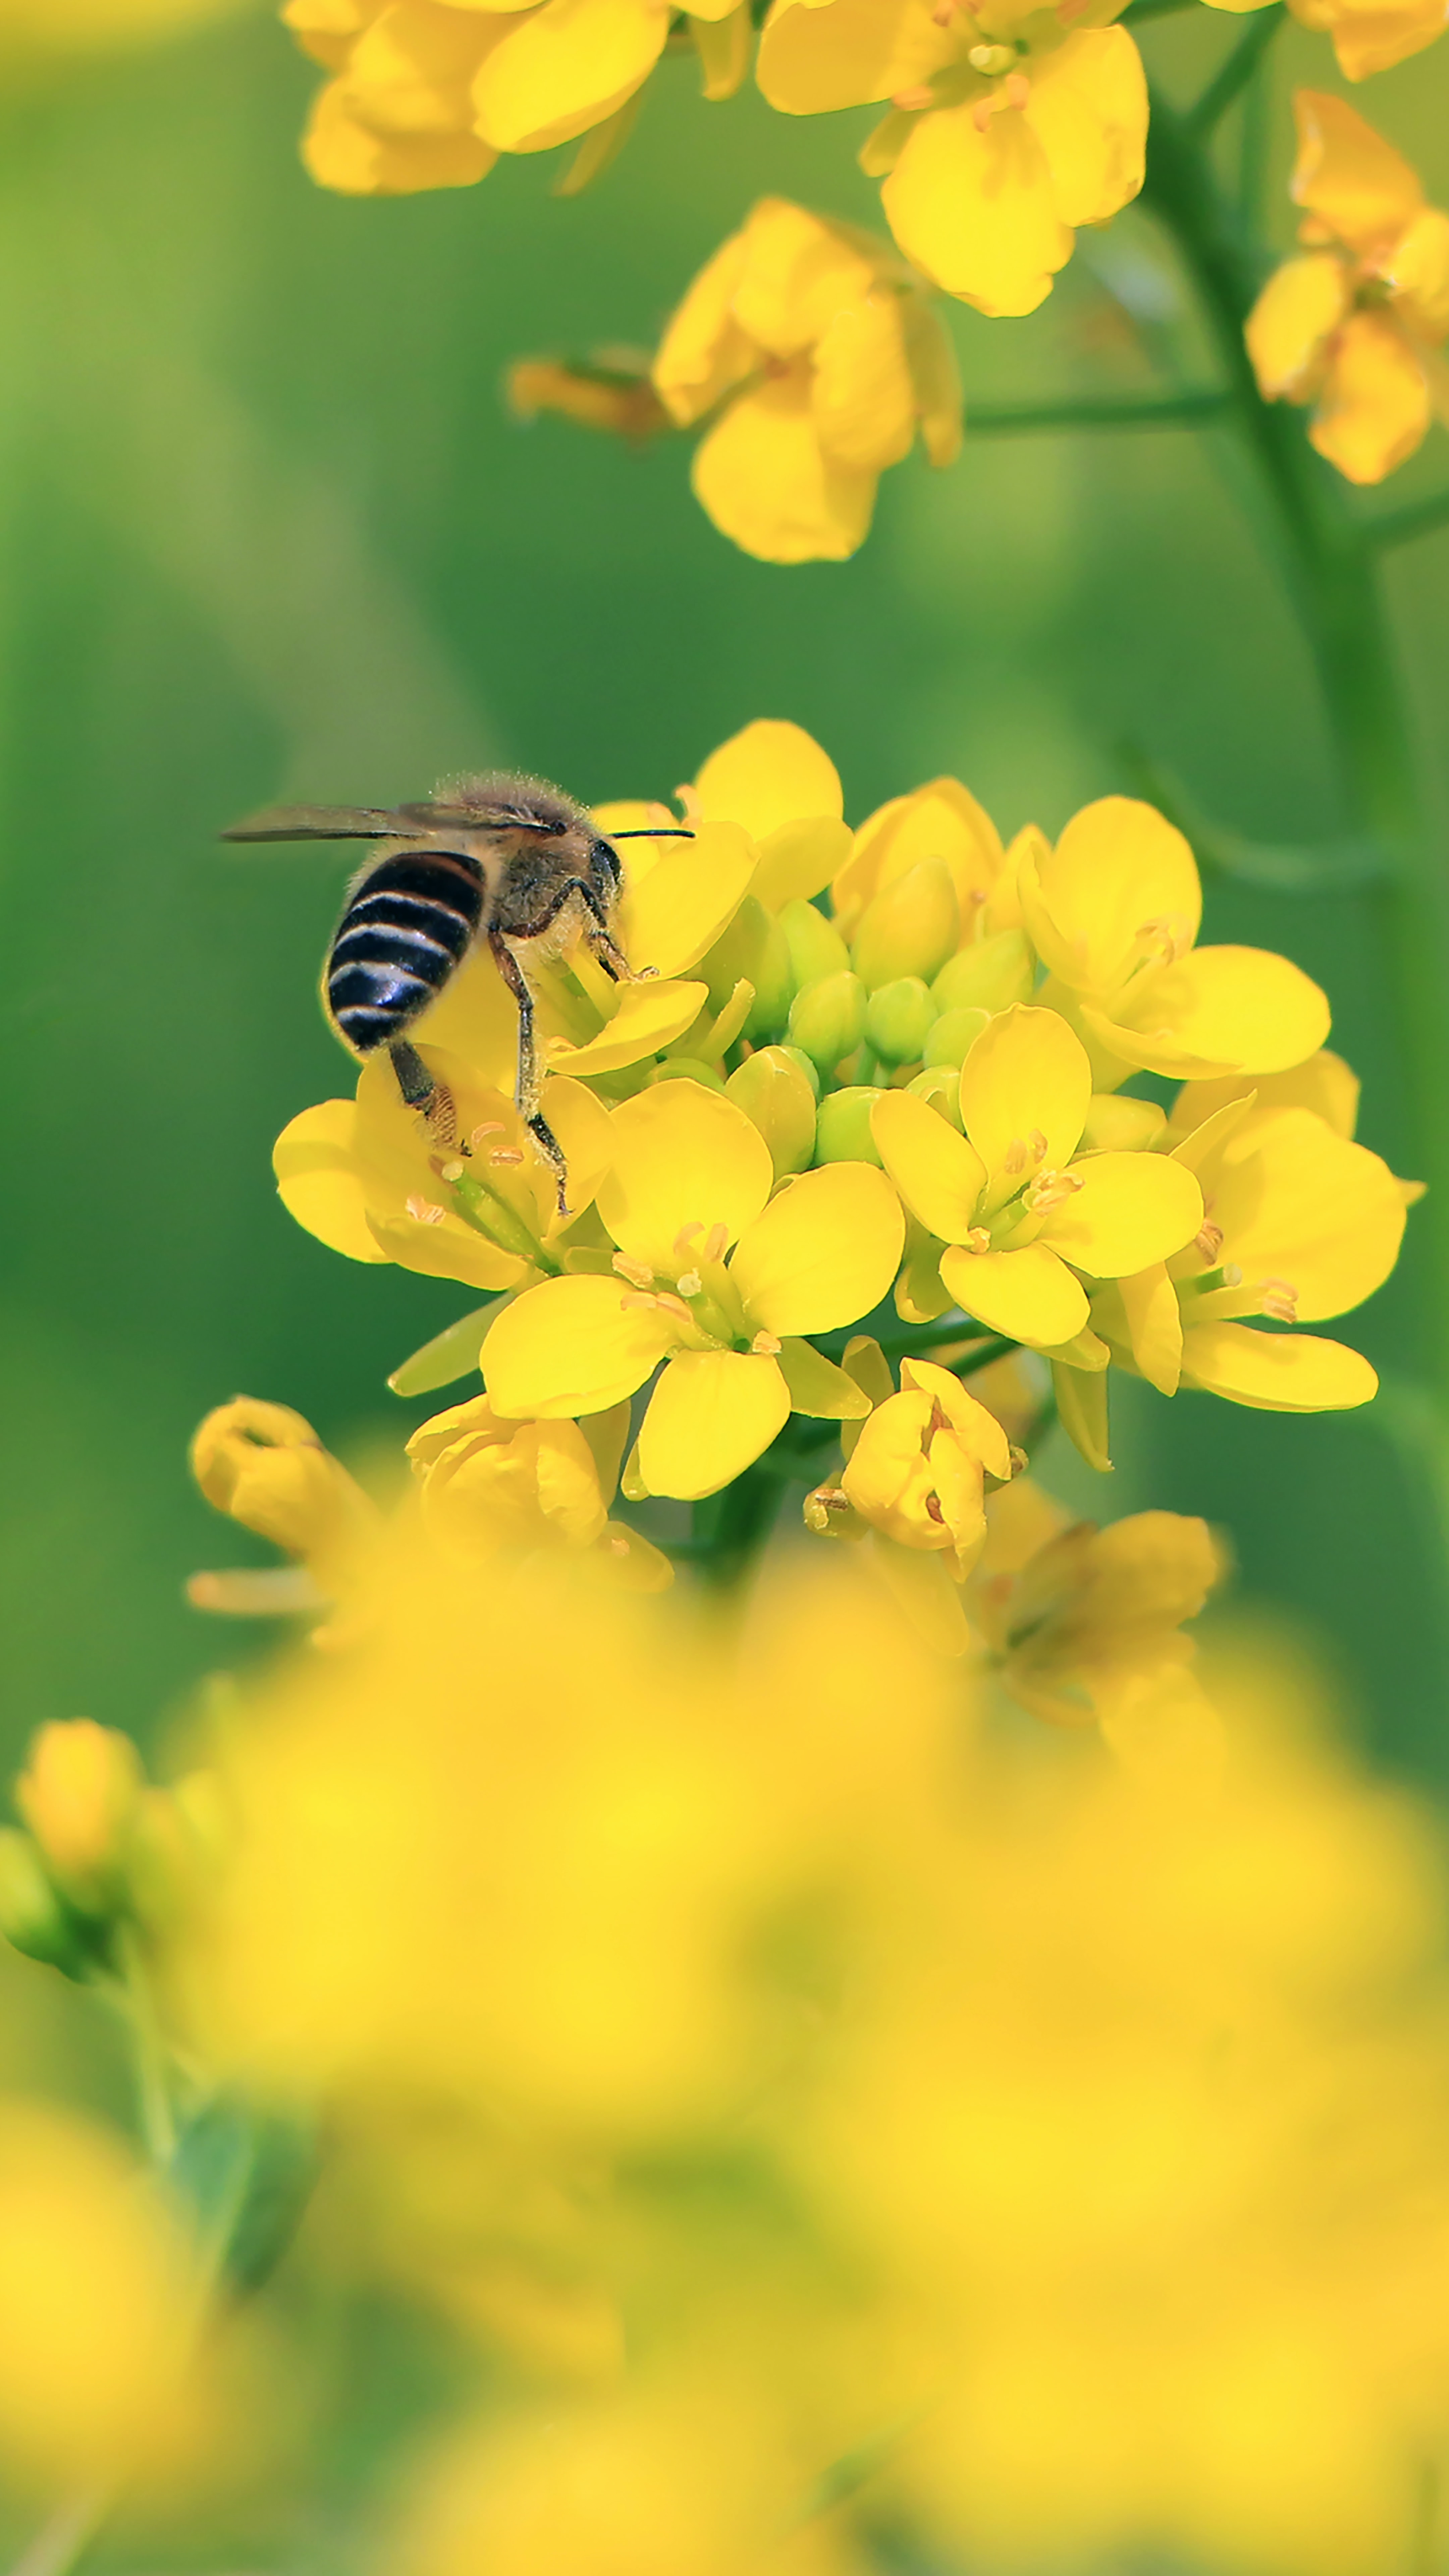 62170 Screensavers and Wallpapers Bee for phone. Download bee, flowers, macro, wings, yellow flowers pictures for free